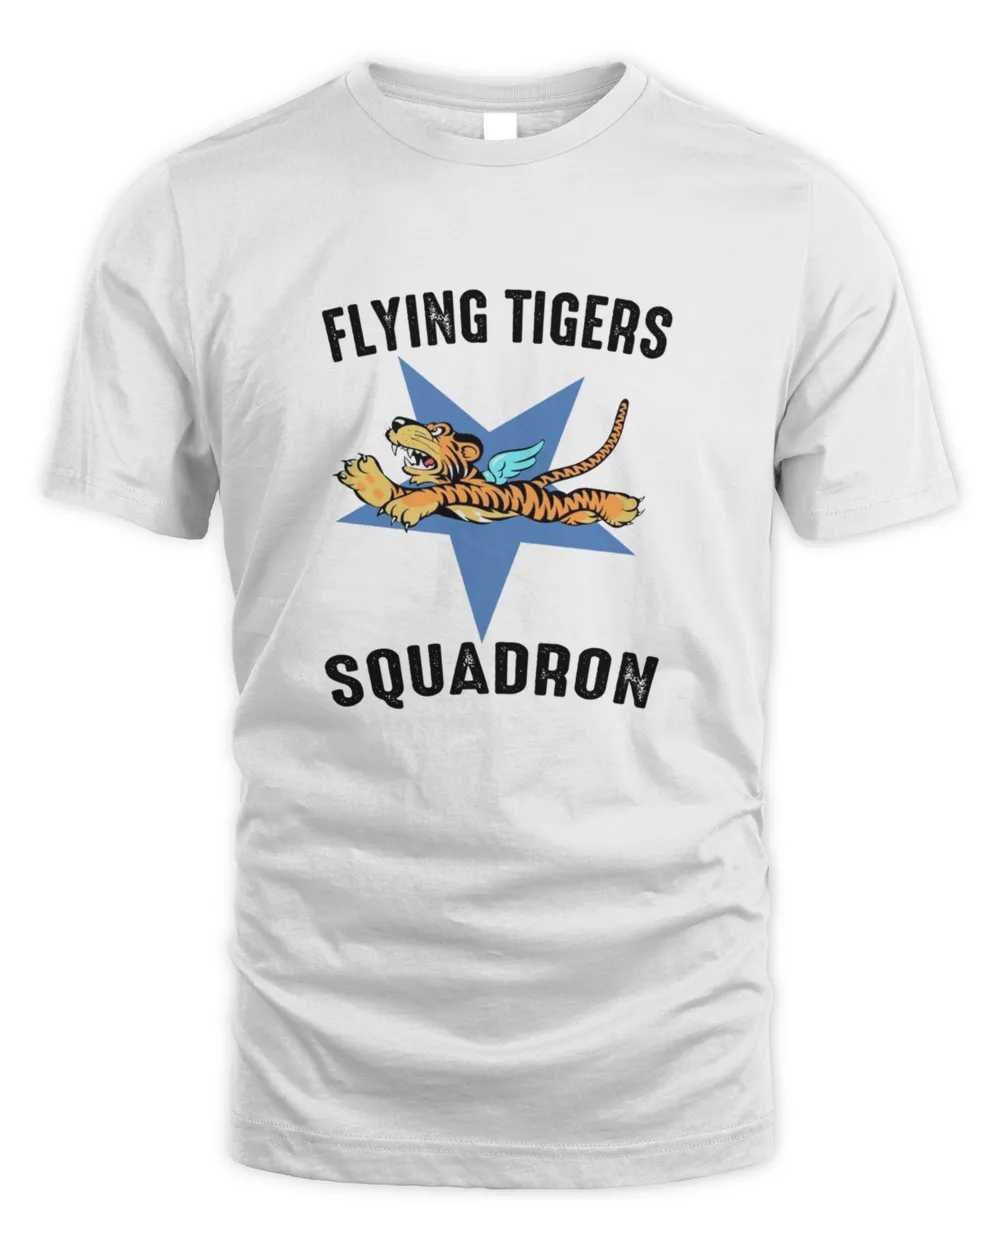 Vintage Style Design Featuring US Army Air Corps Flying Tigers Squadron Design56165616 T-Shirt